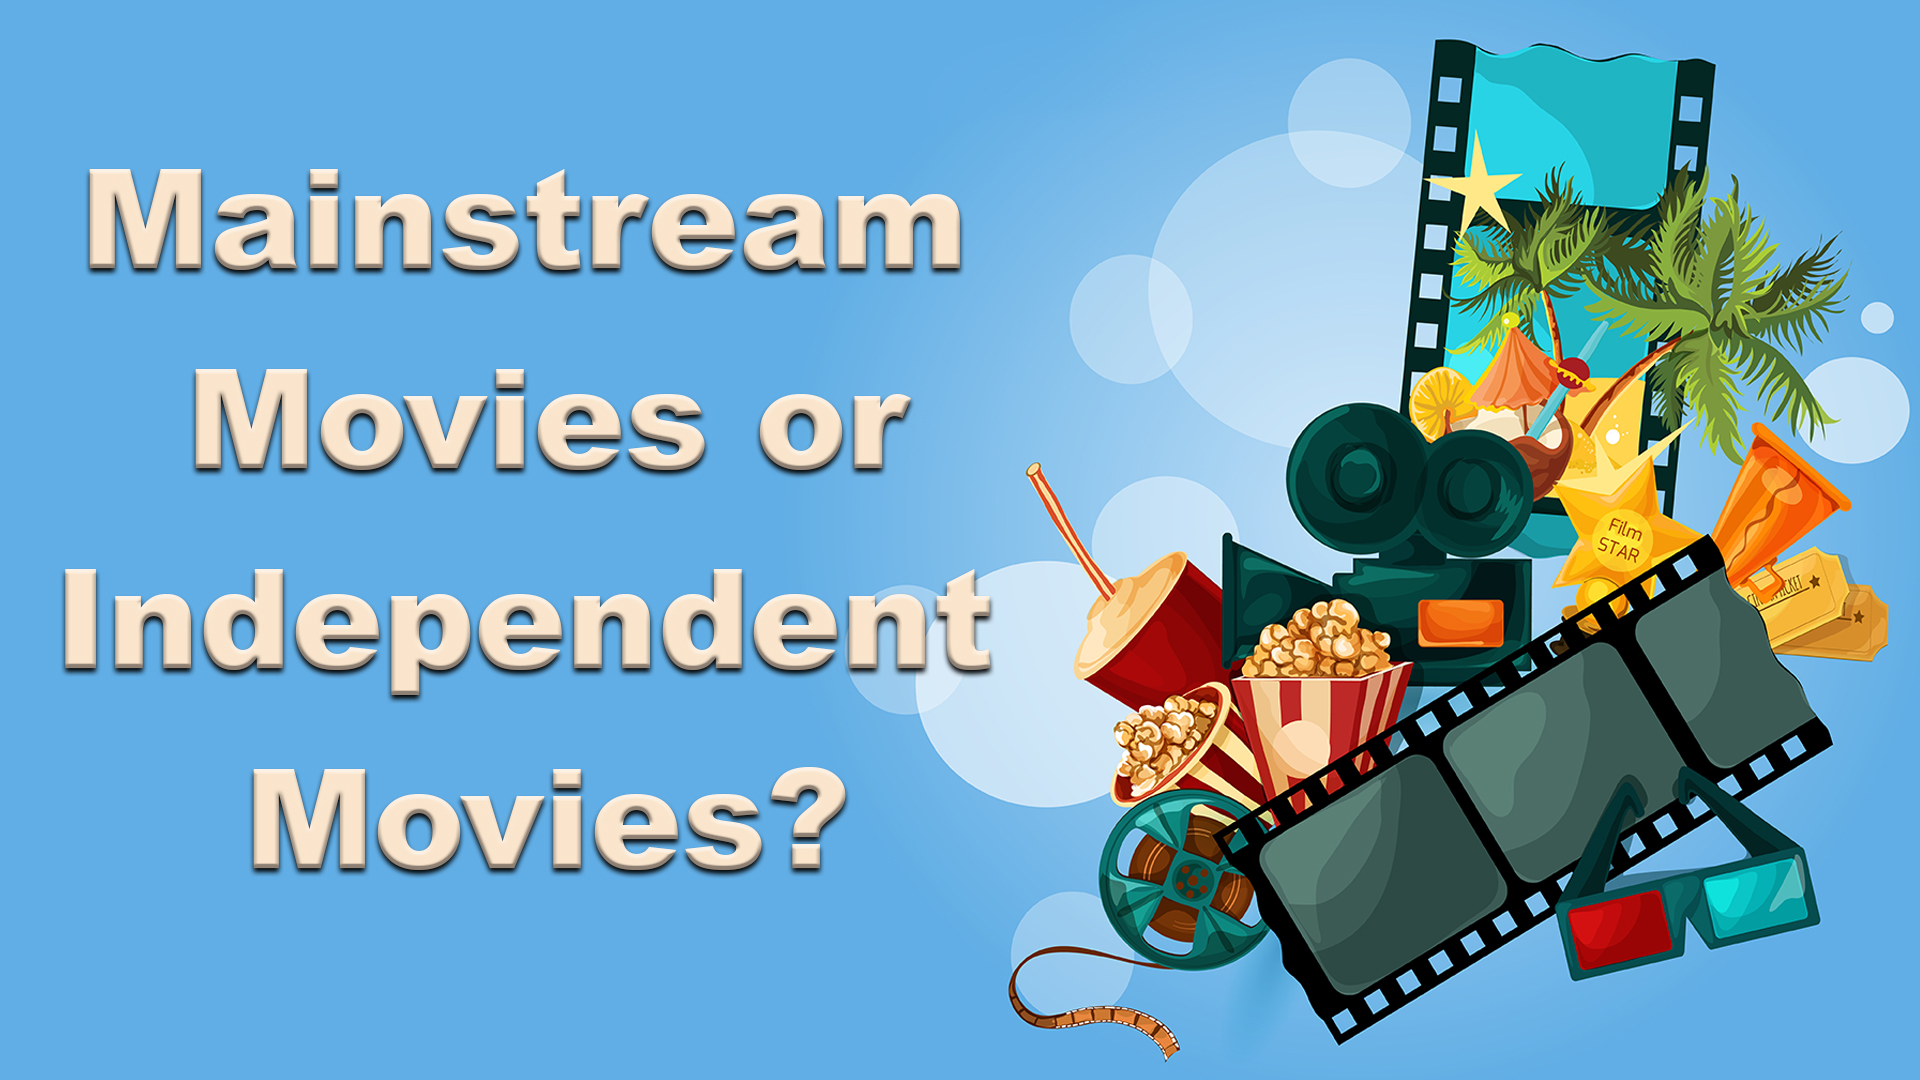 What do you prefer, Indie Movies or Main-stream Movies?